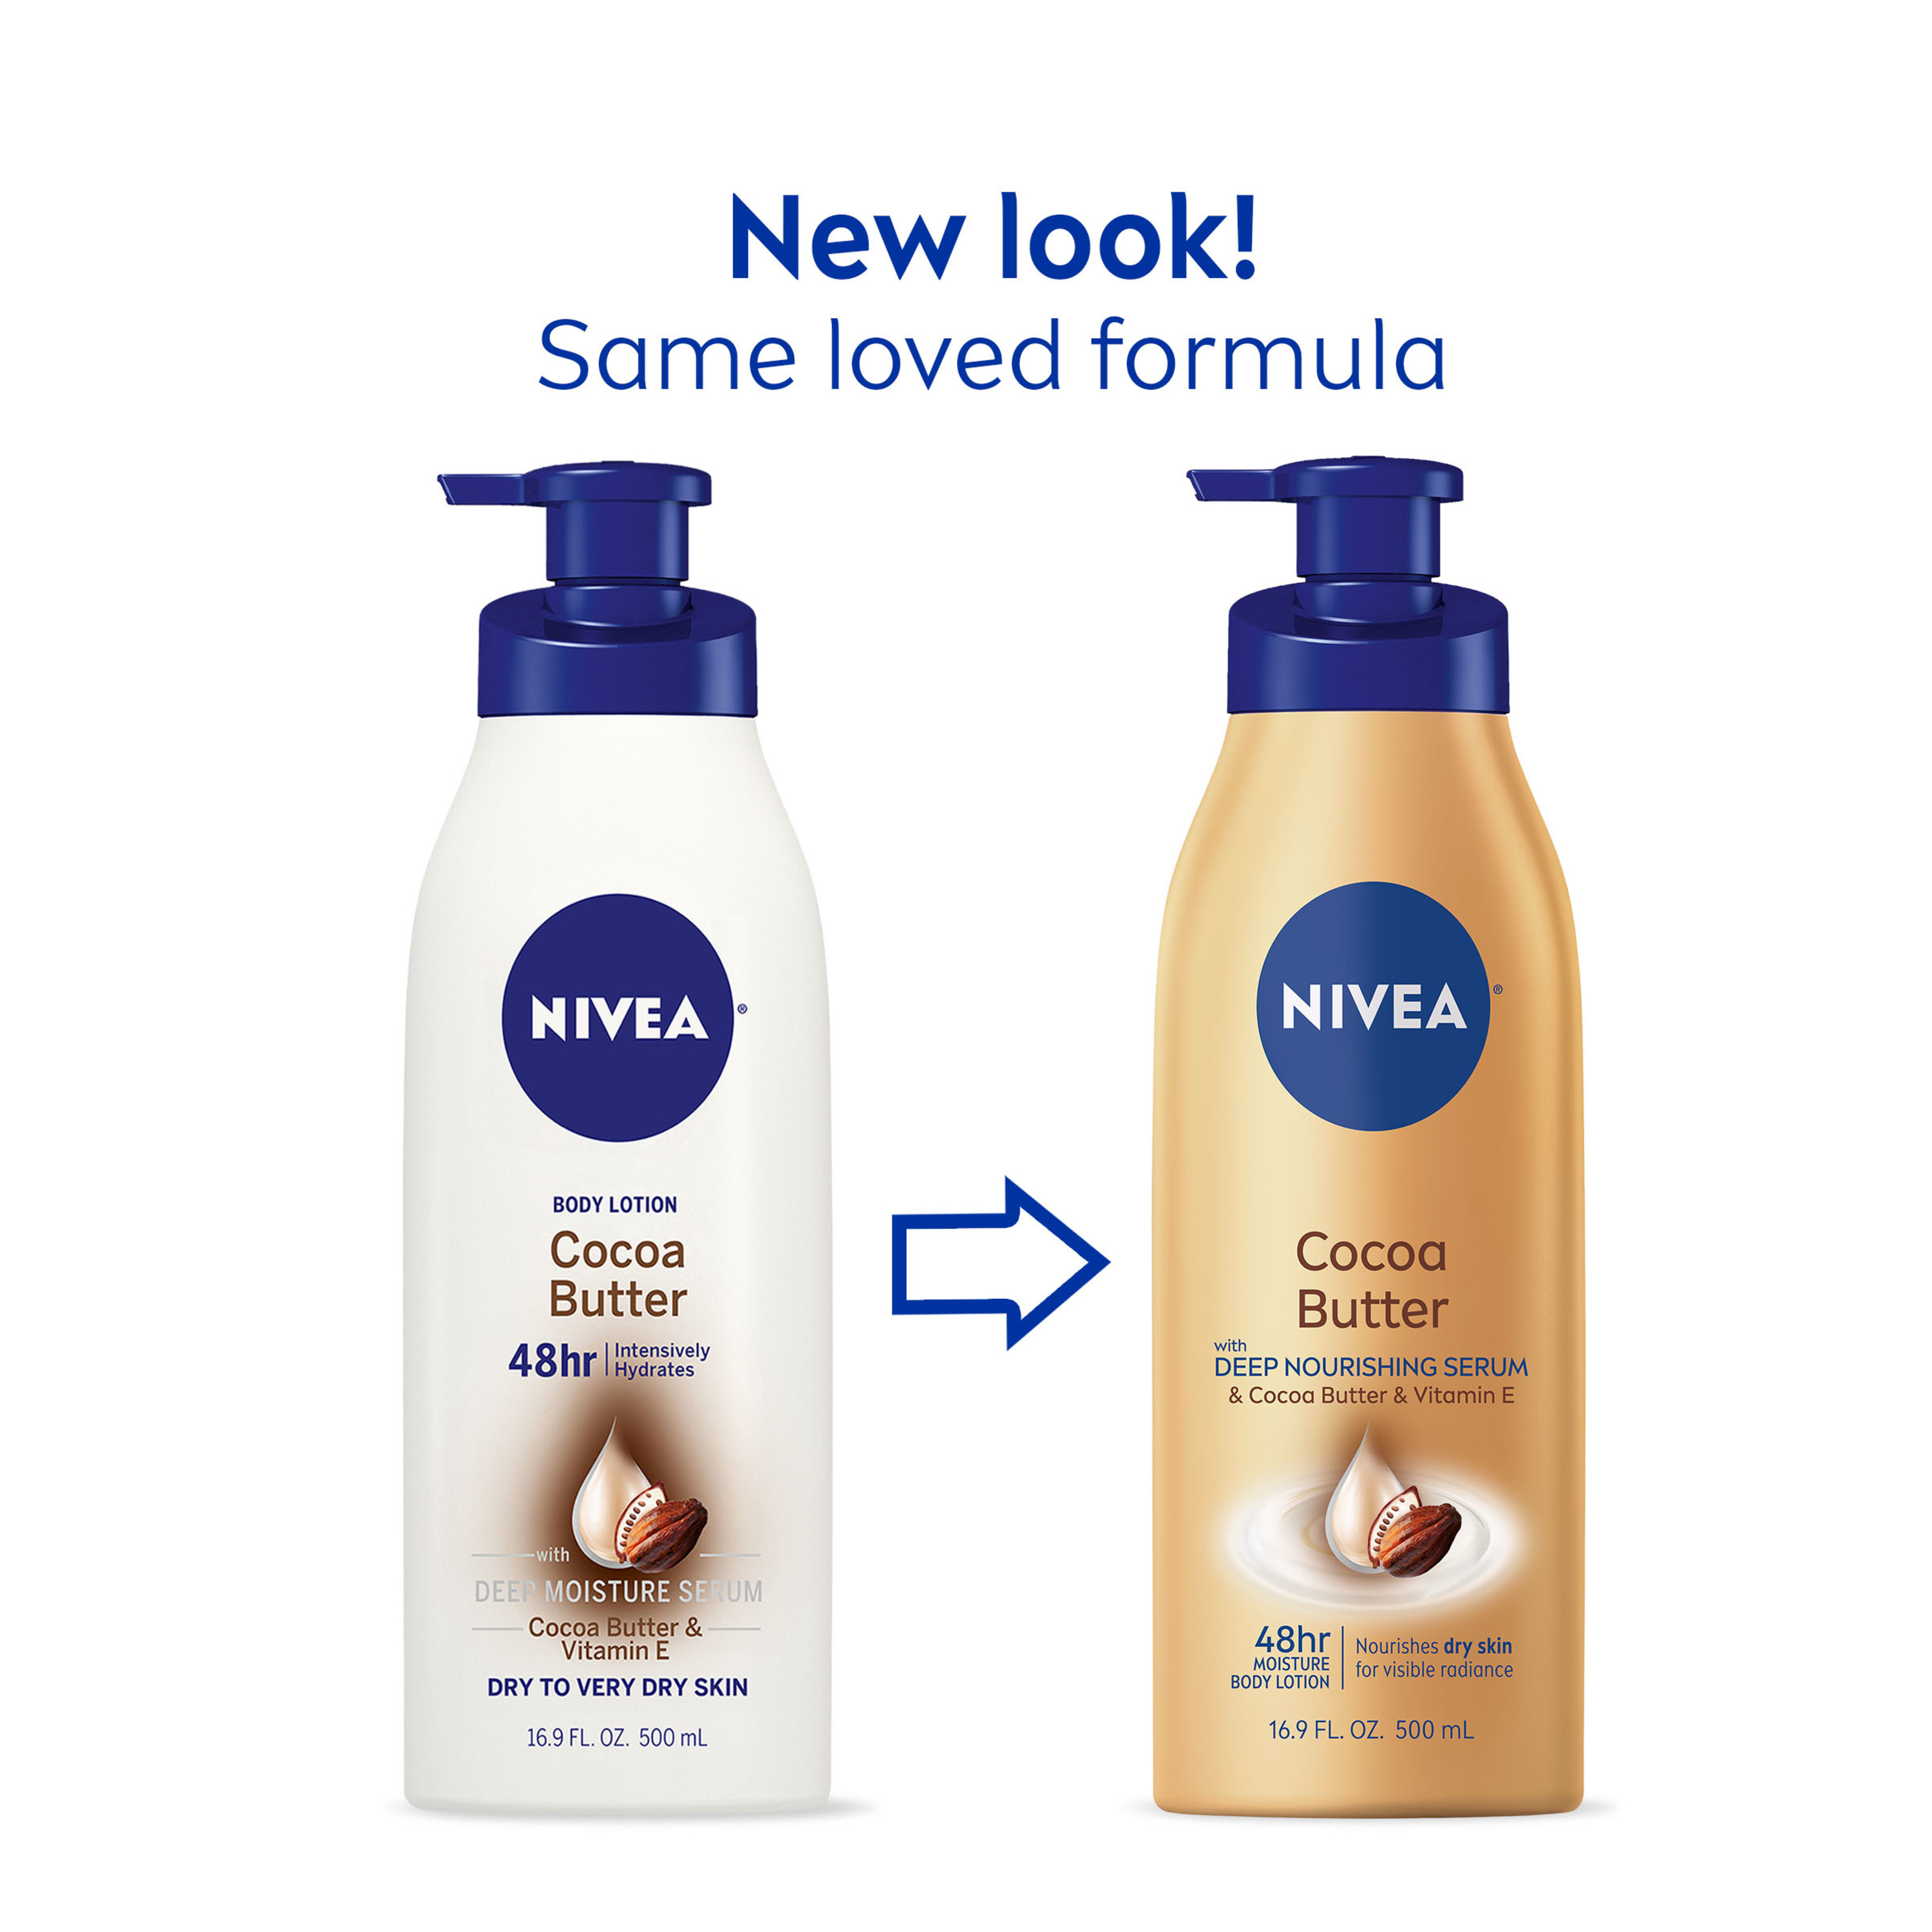 NIVEA Cocoa Butter Body Lotion with Deep Nourishing Serum, 16.9 Fl Oz - image 2 of 11